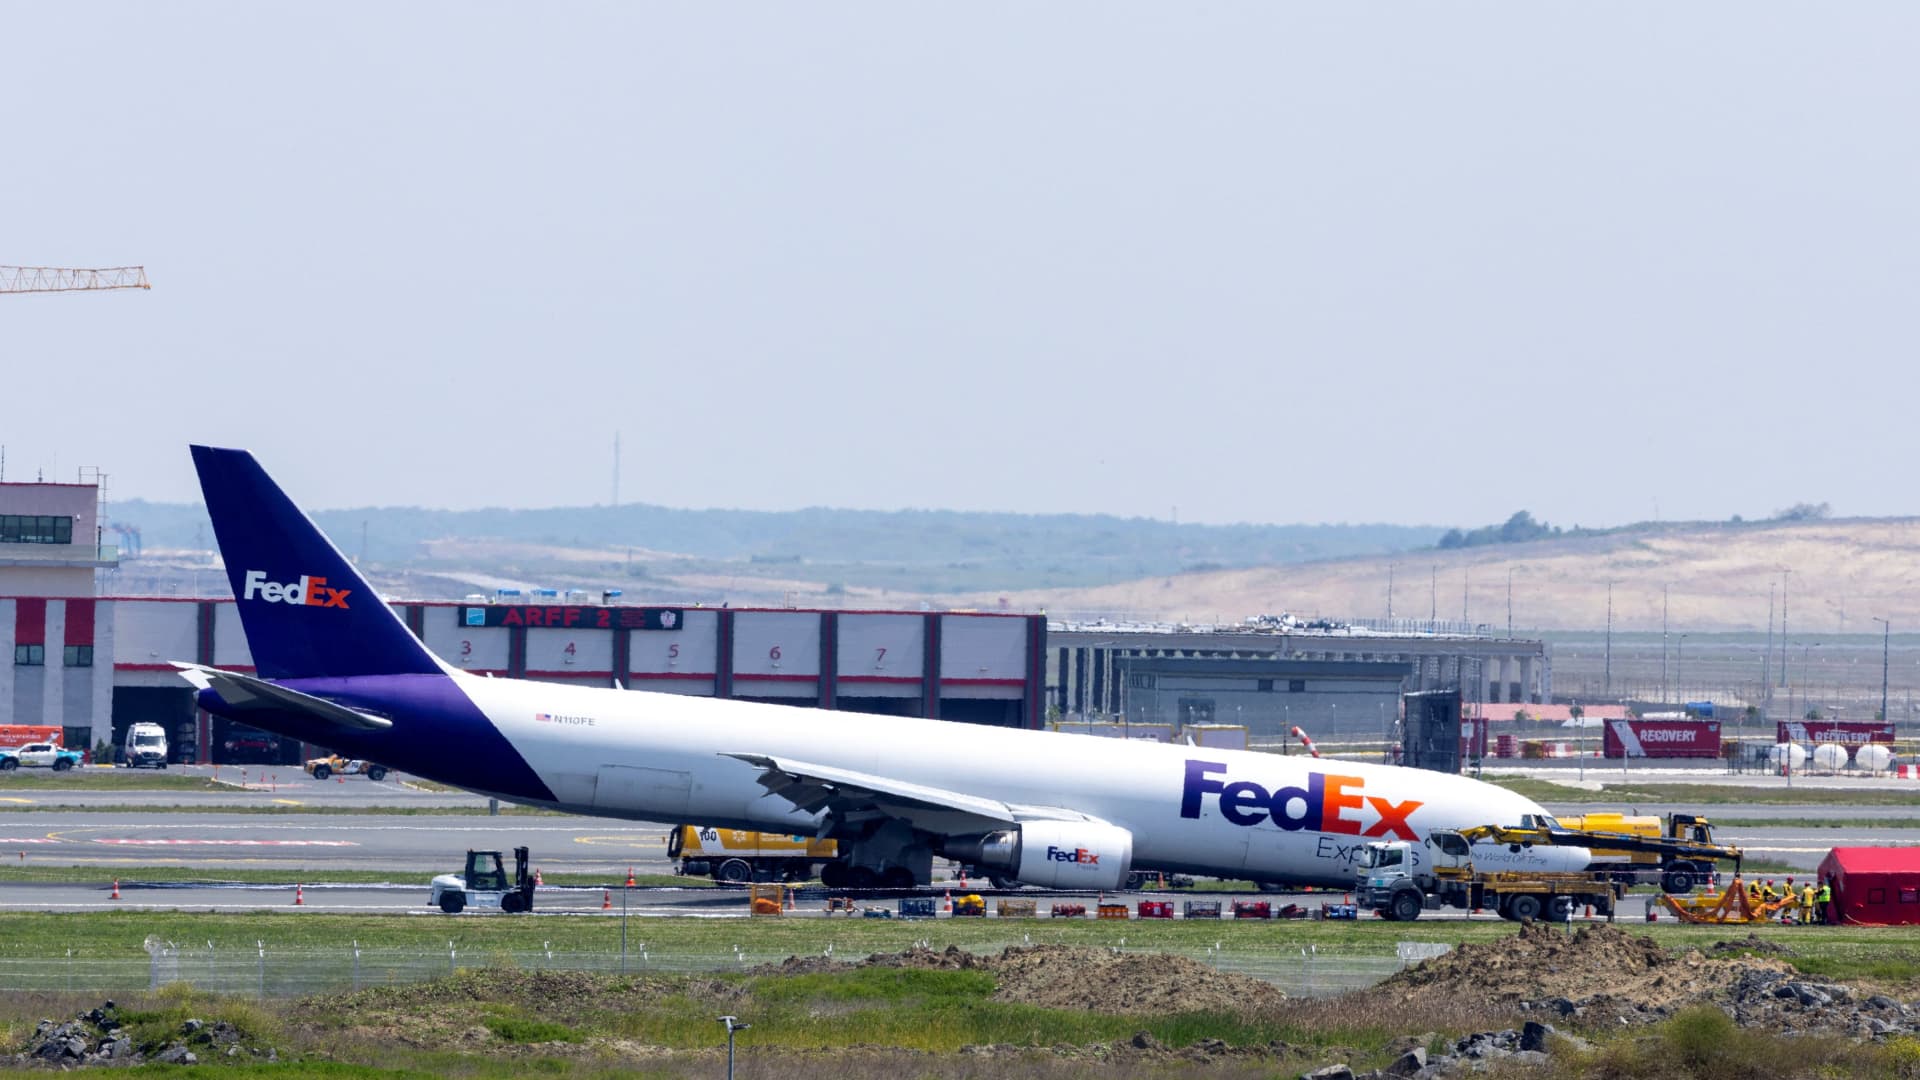 Boeing cargo plane lands without front nose gear in Istanbul; investigation launched [Video]